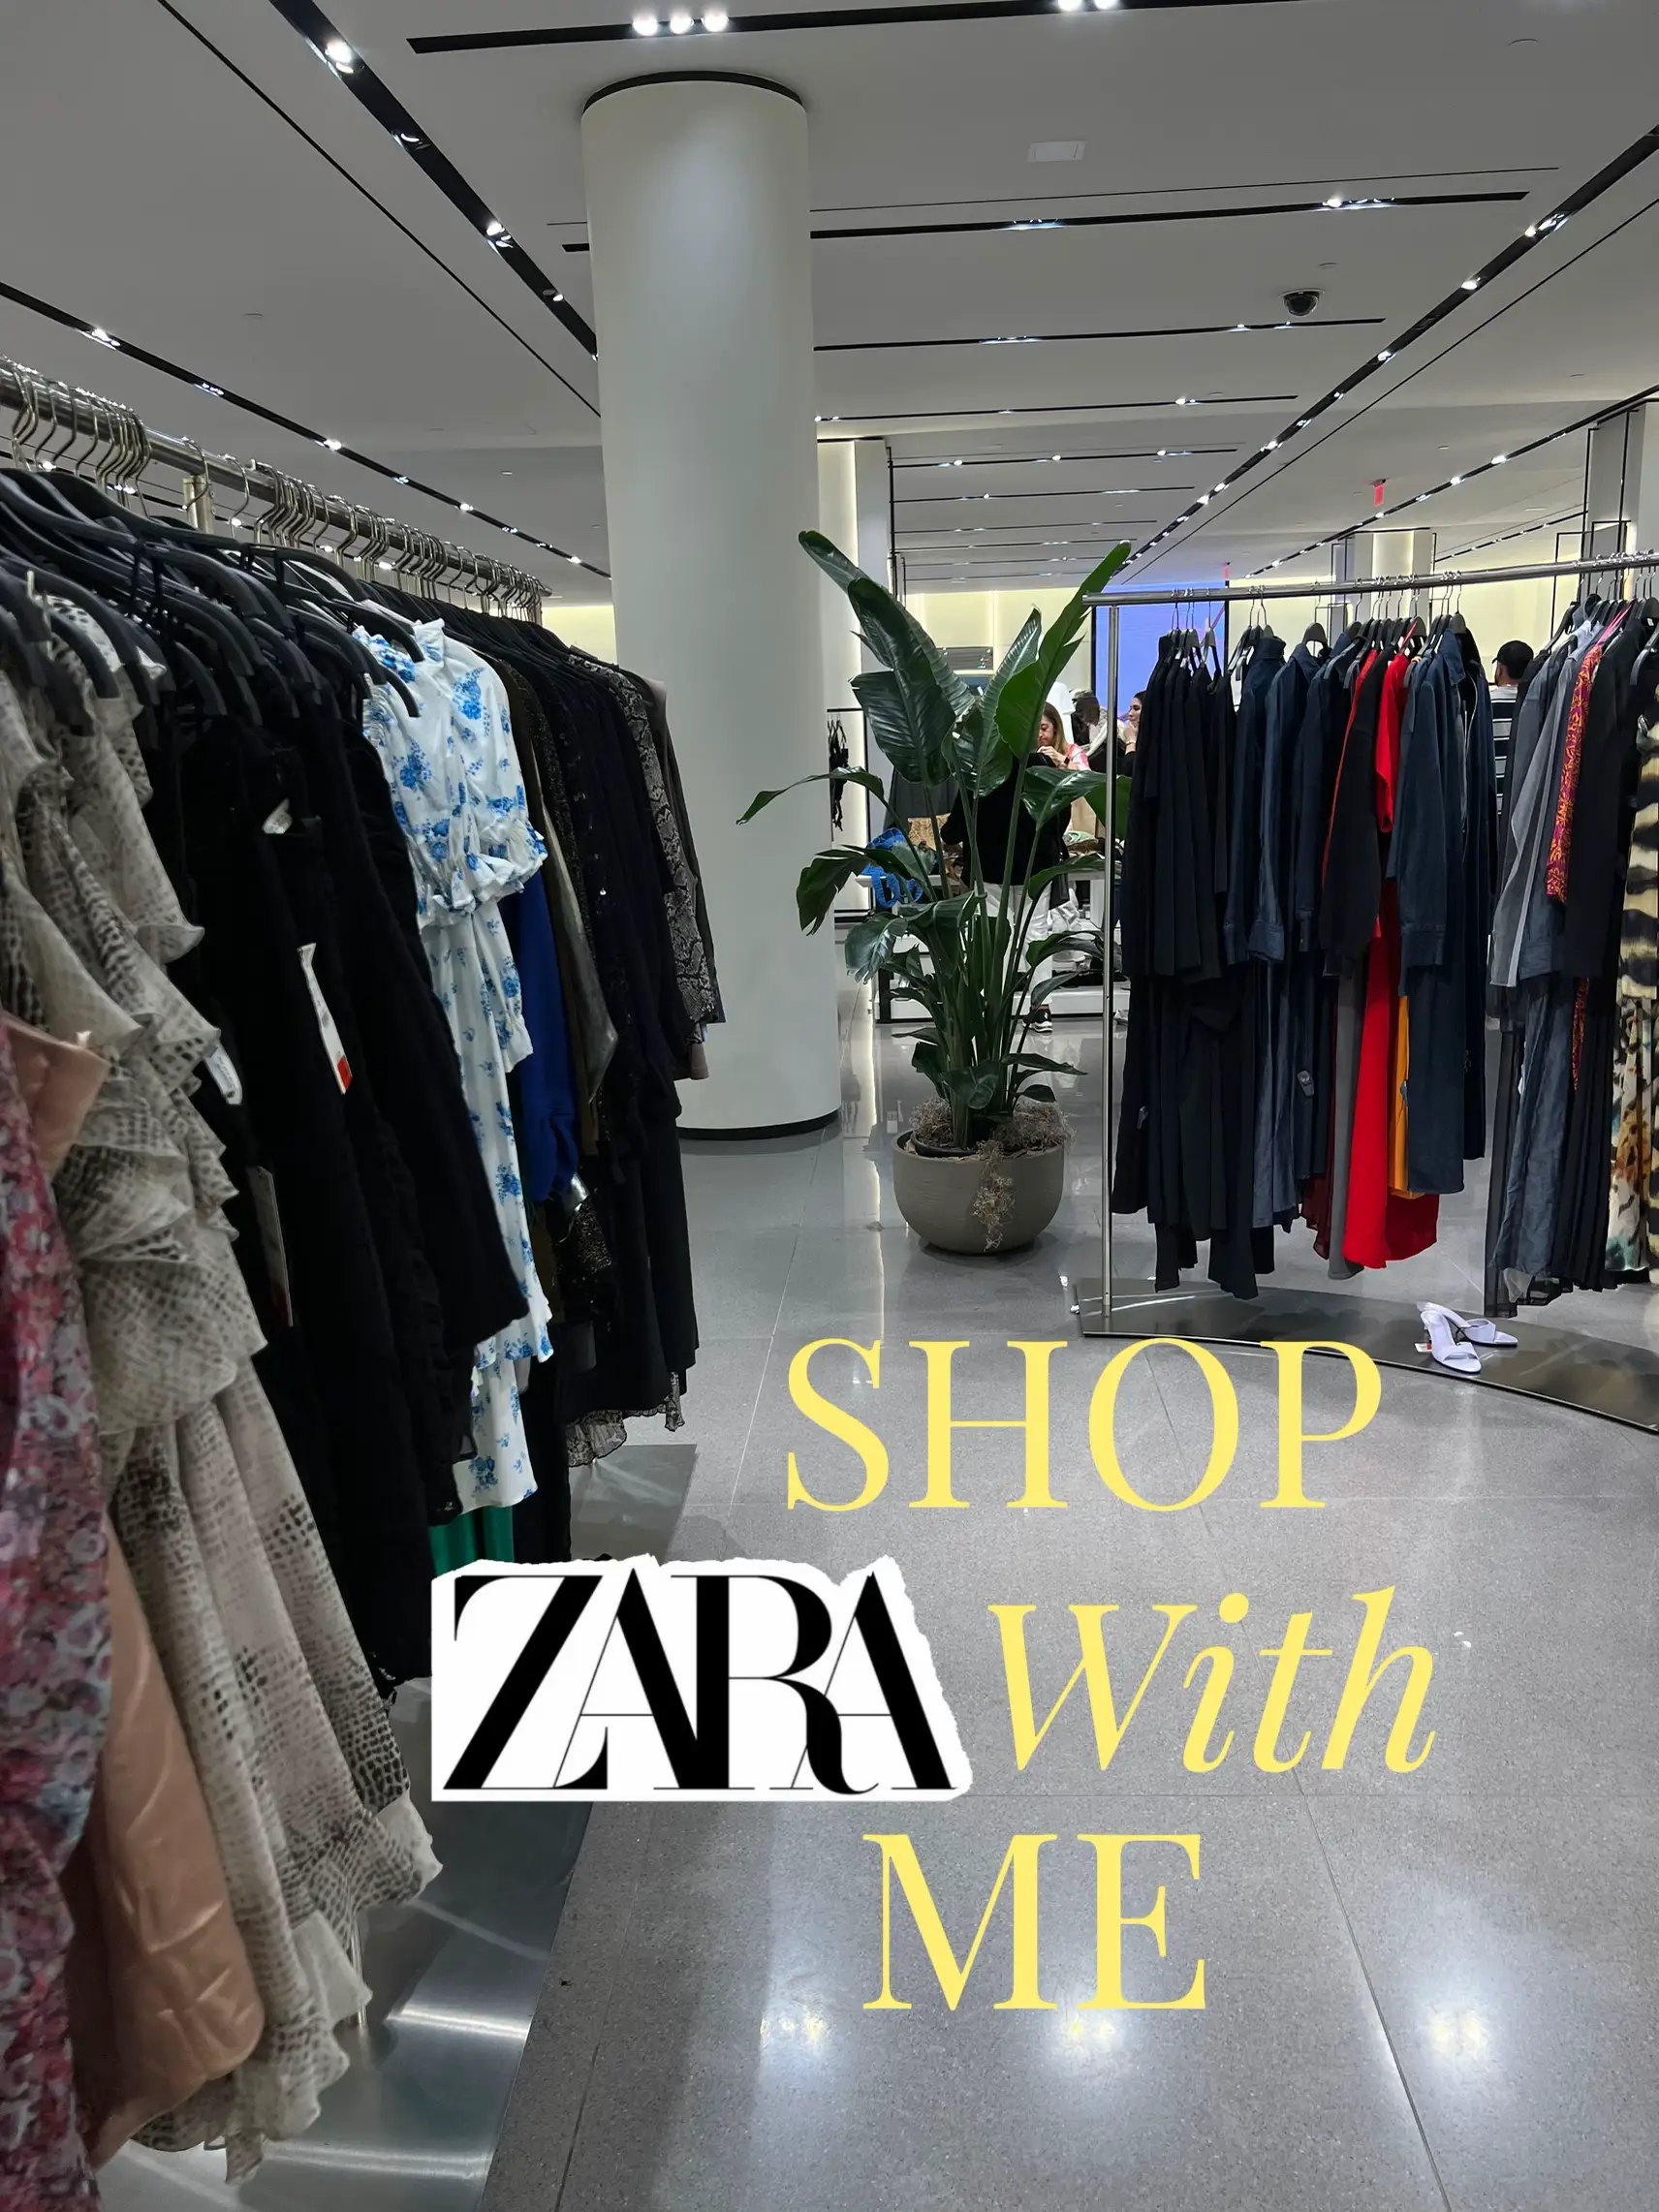 Lookbook: New in pants at Zara!  Gallery posted by lexuscrystal